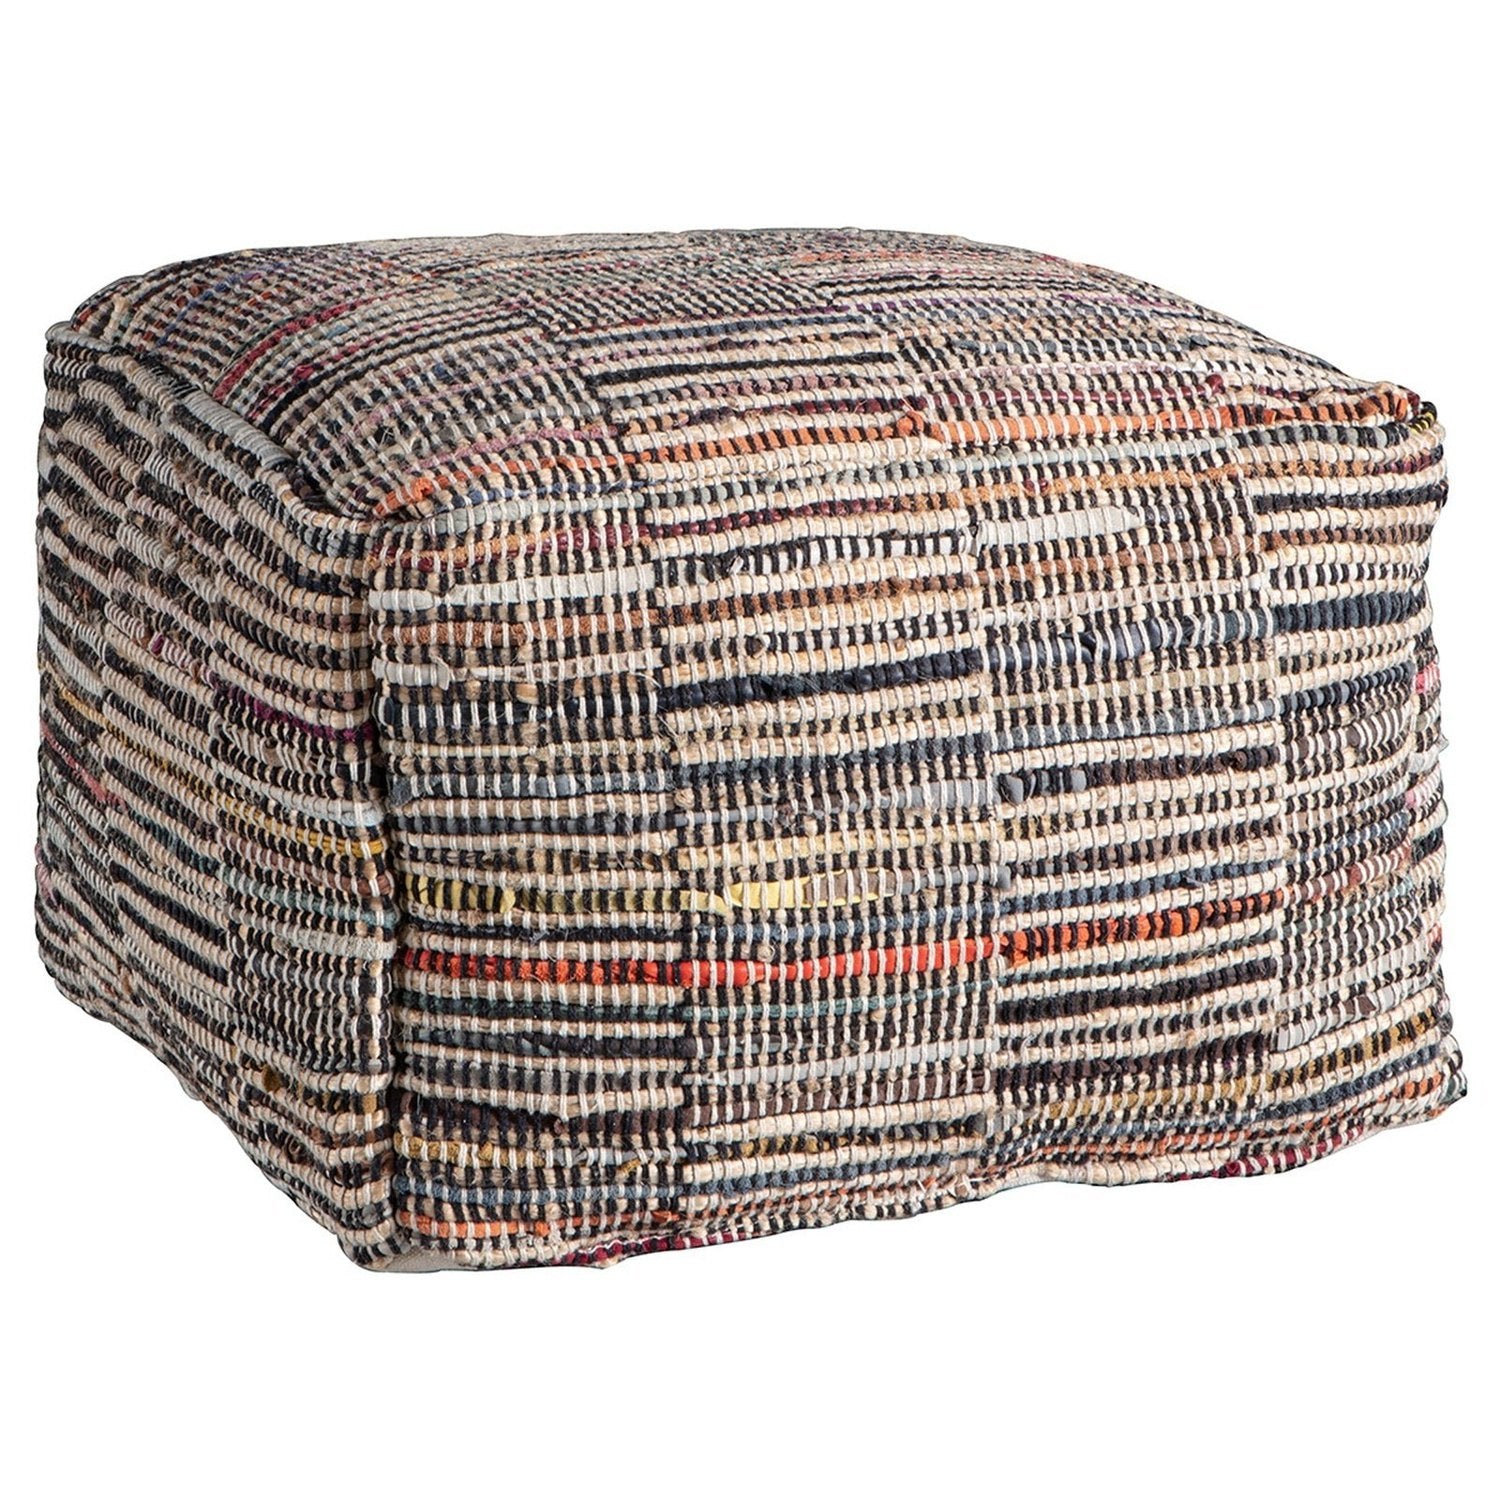 Rhode Island Pouffe - Multicolor Patchwork Footrest - Hand Loomed